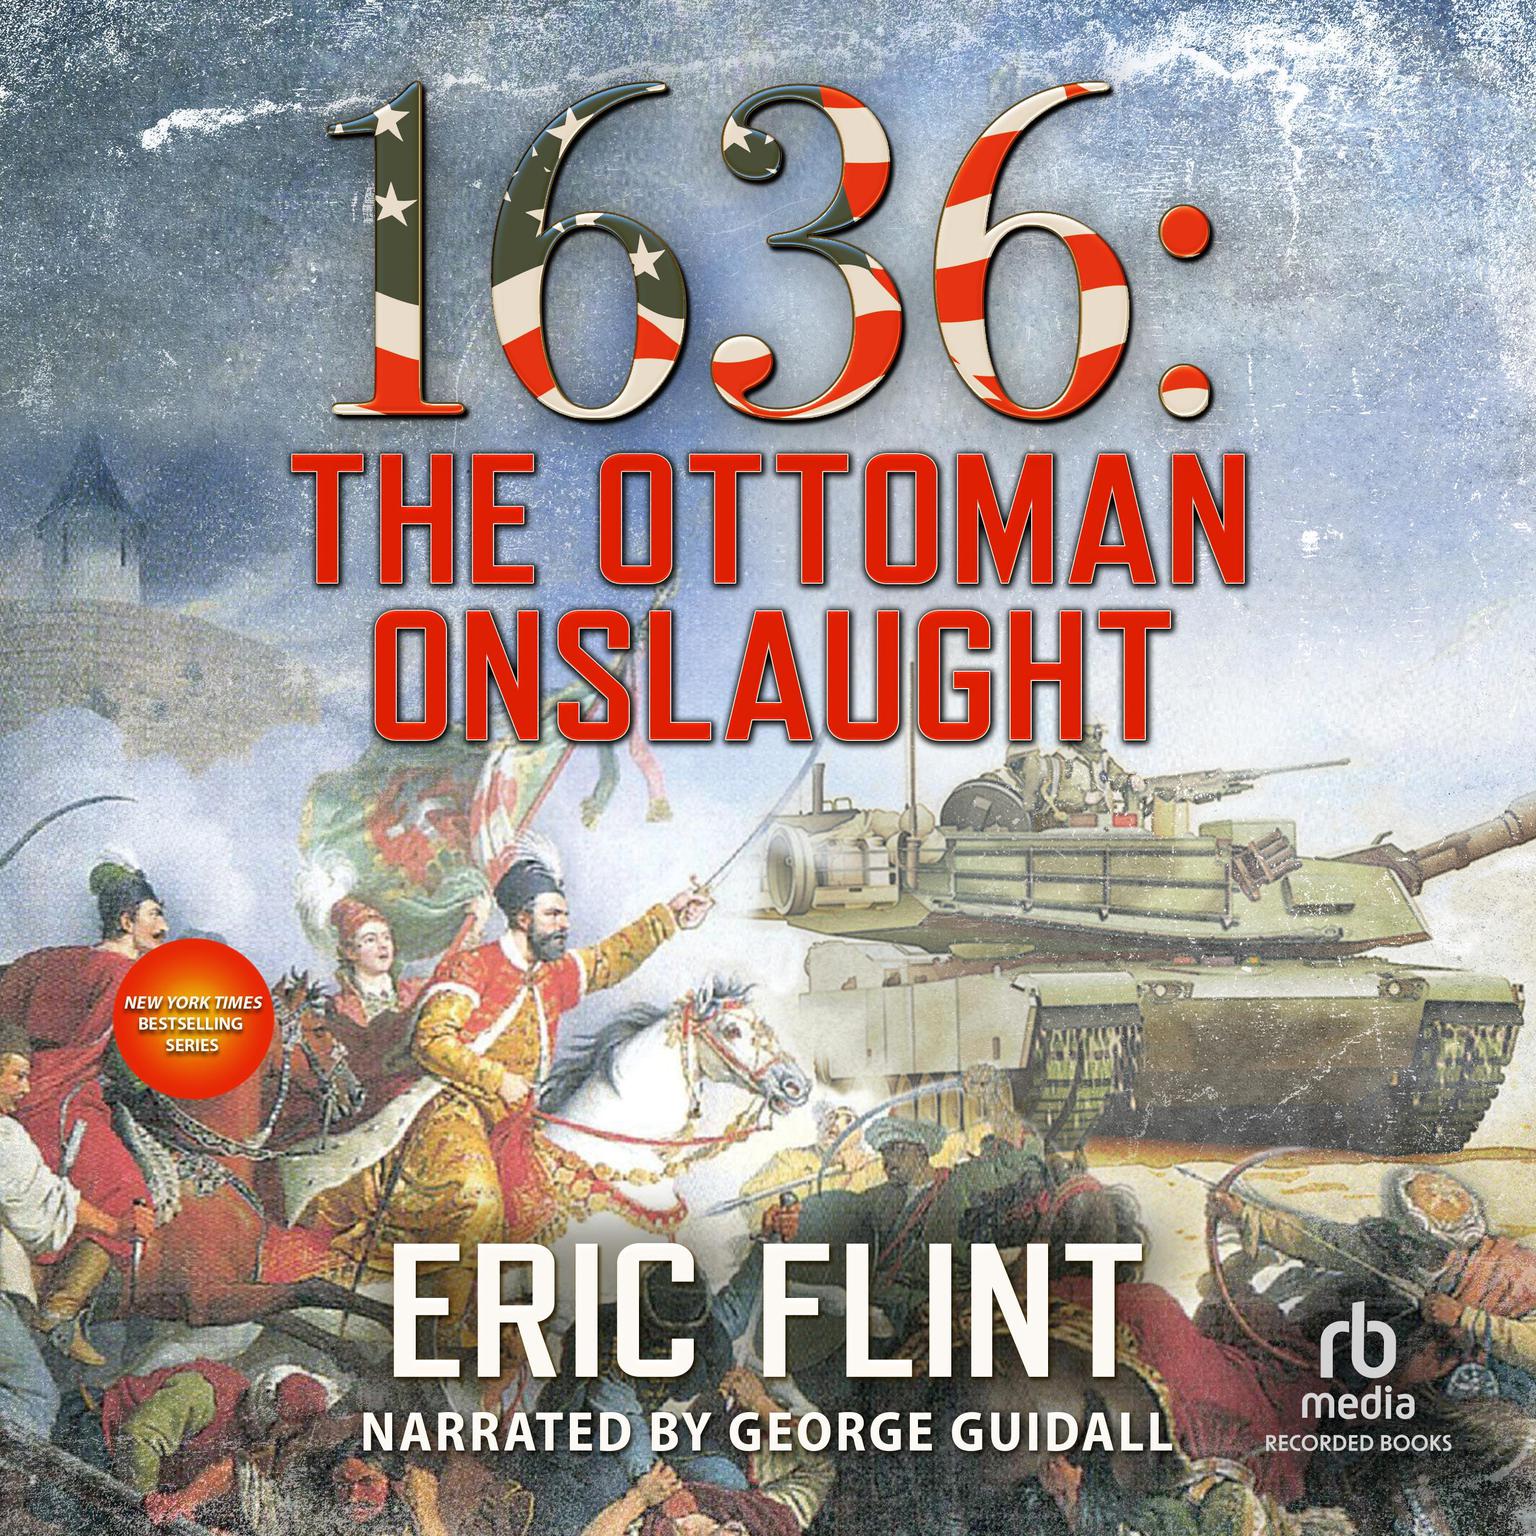 1636: The Ottoman Onslaught Audiobook, by Eric Flint